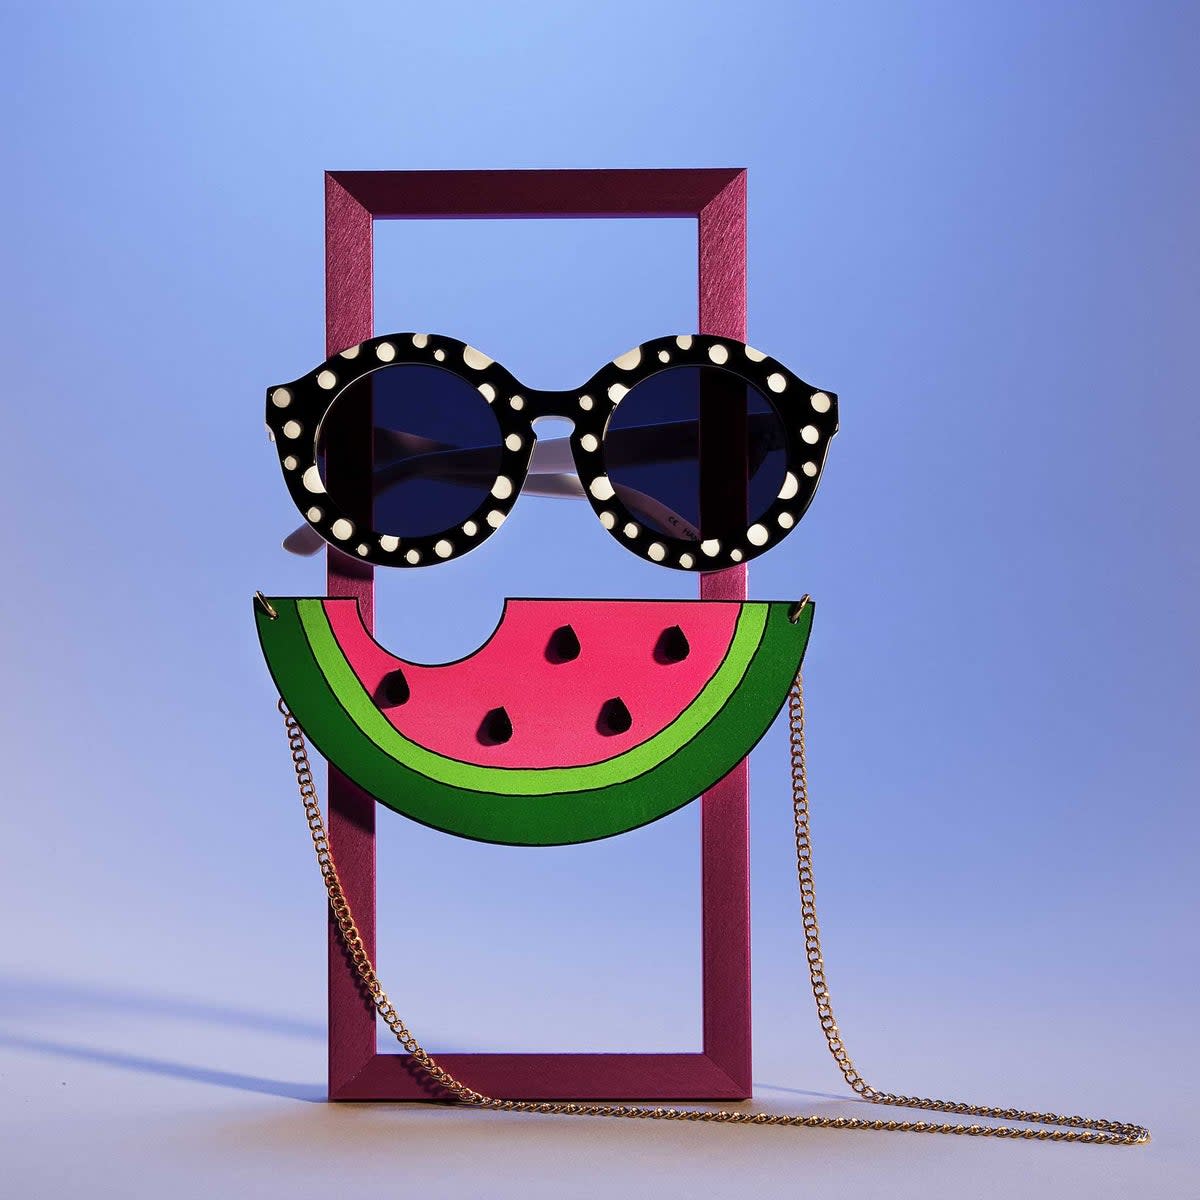 Sunglasses, £150, Henry Holland; watermelon necklace, £85, Browns; frame, £5, John Lewis